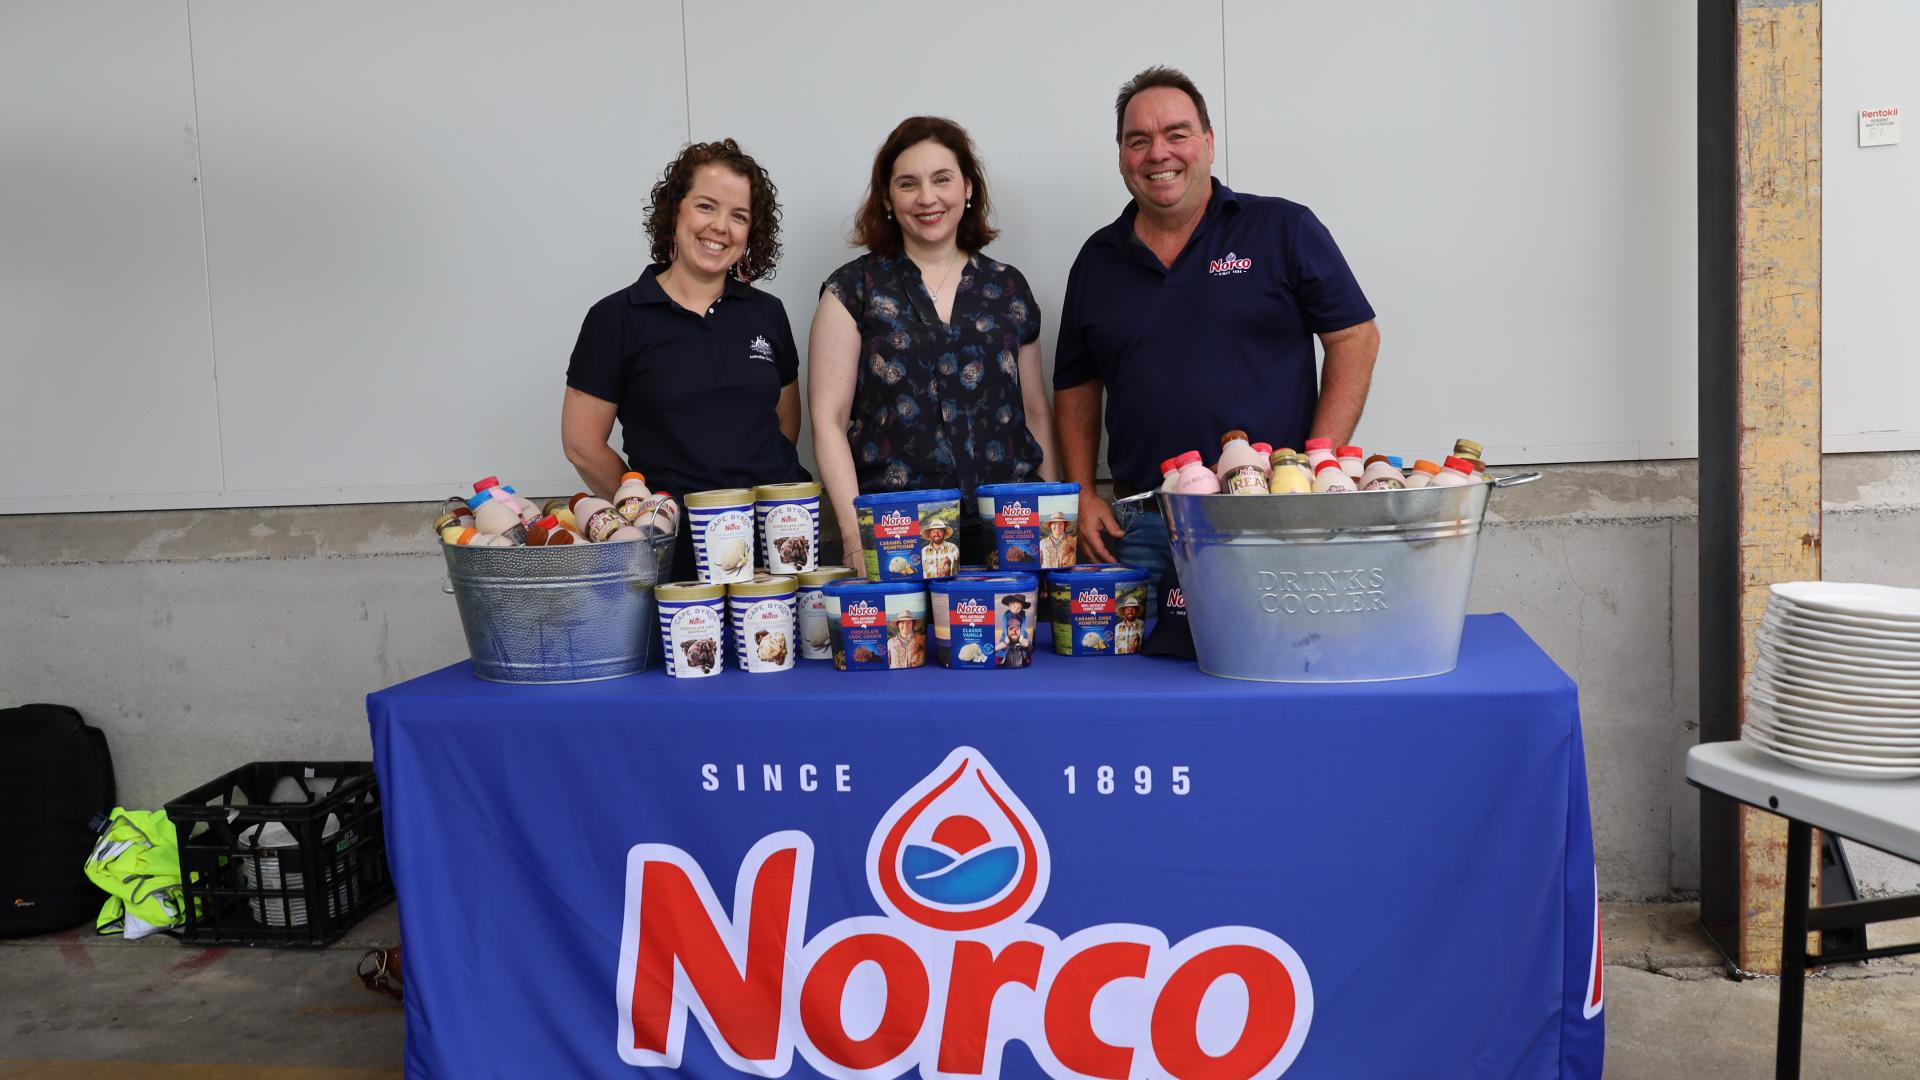 Three people stand behind a Norco branded table featuring ice cream and flavoured milk products.